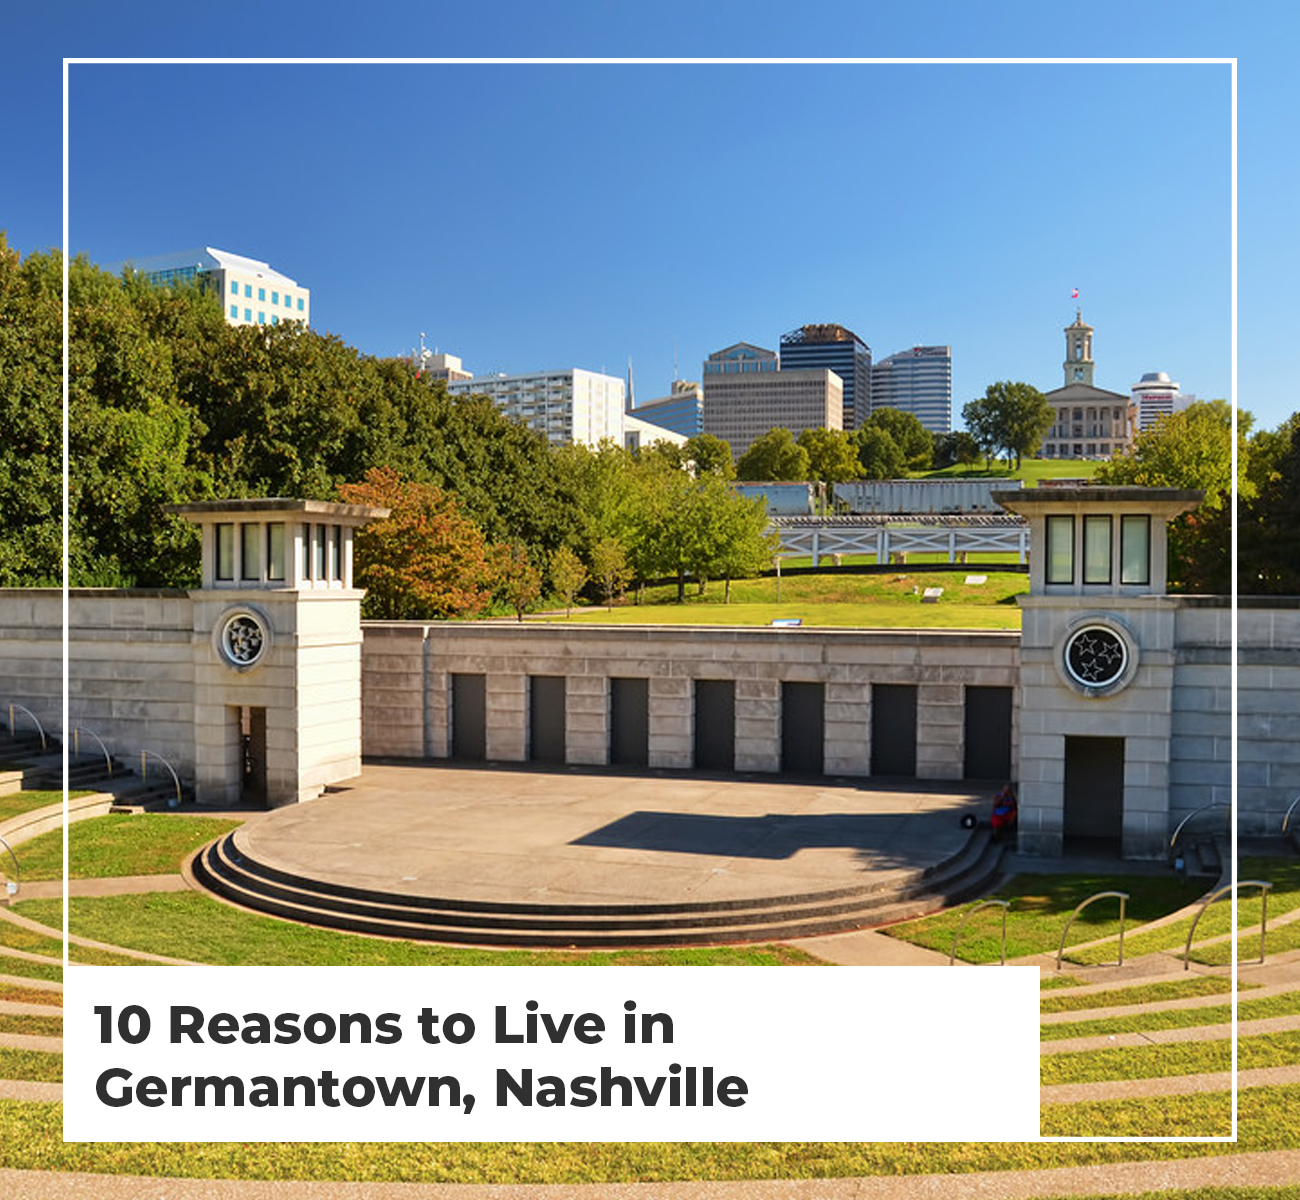 10 Reasons to Live in Germantown, Nashville